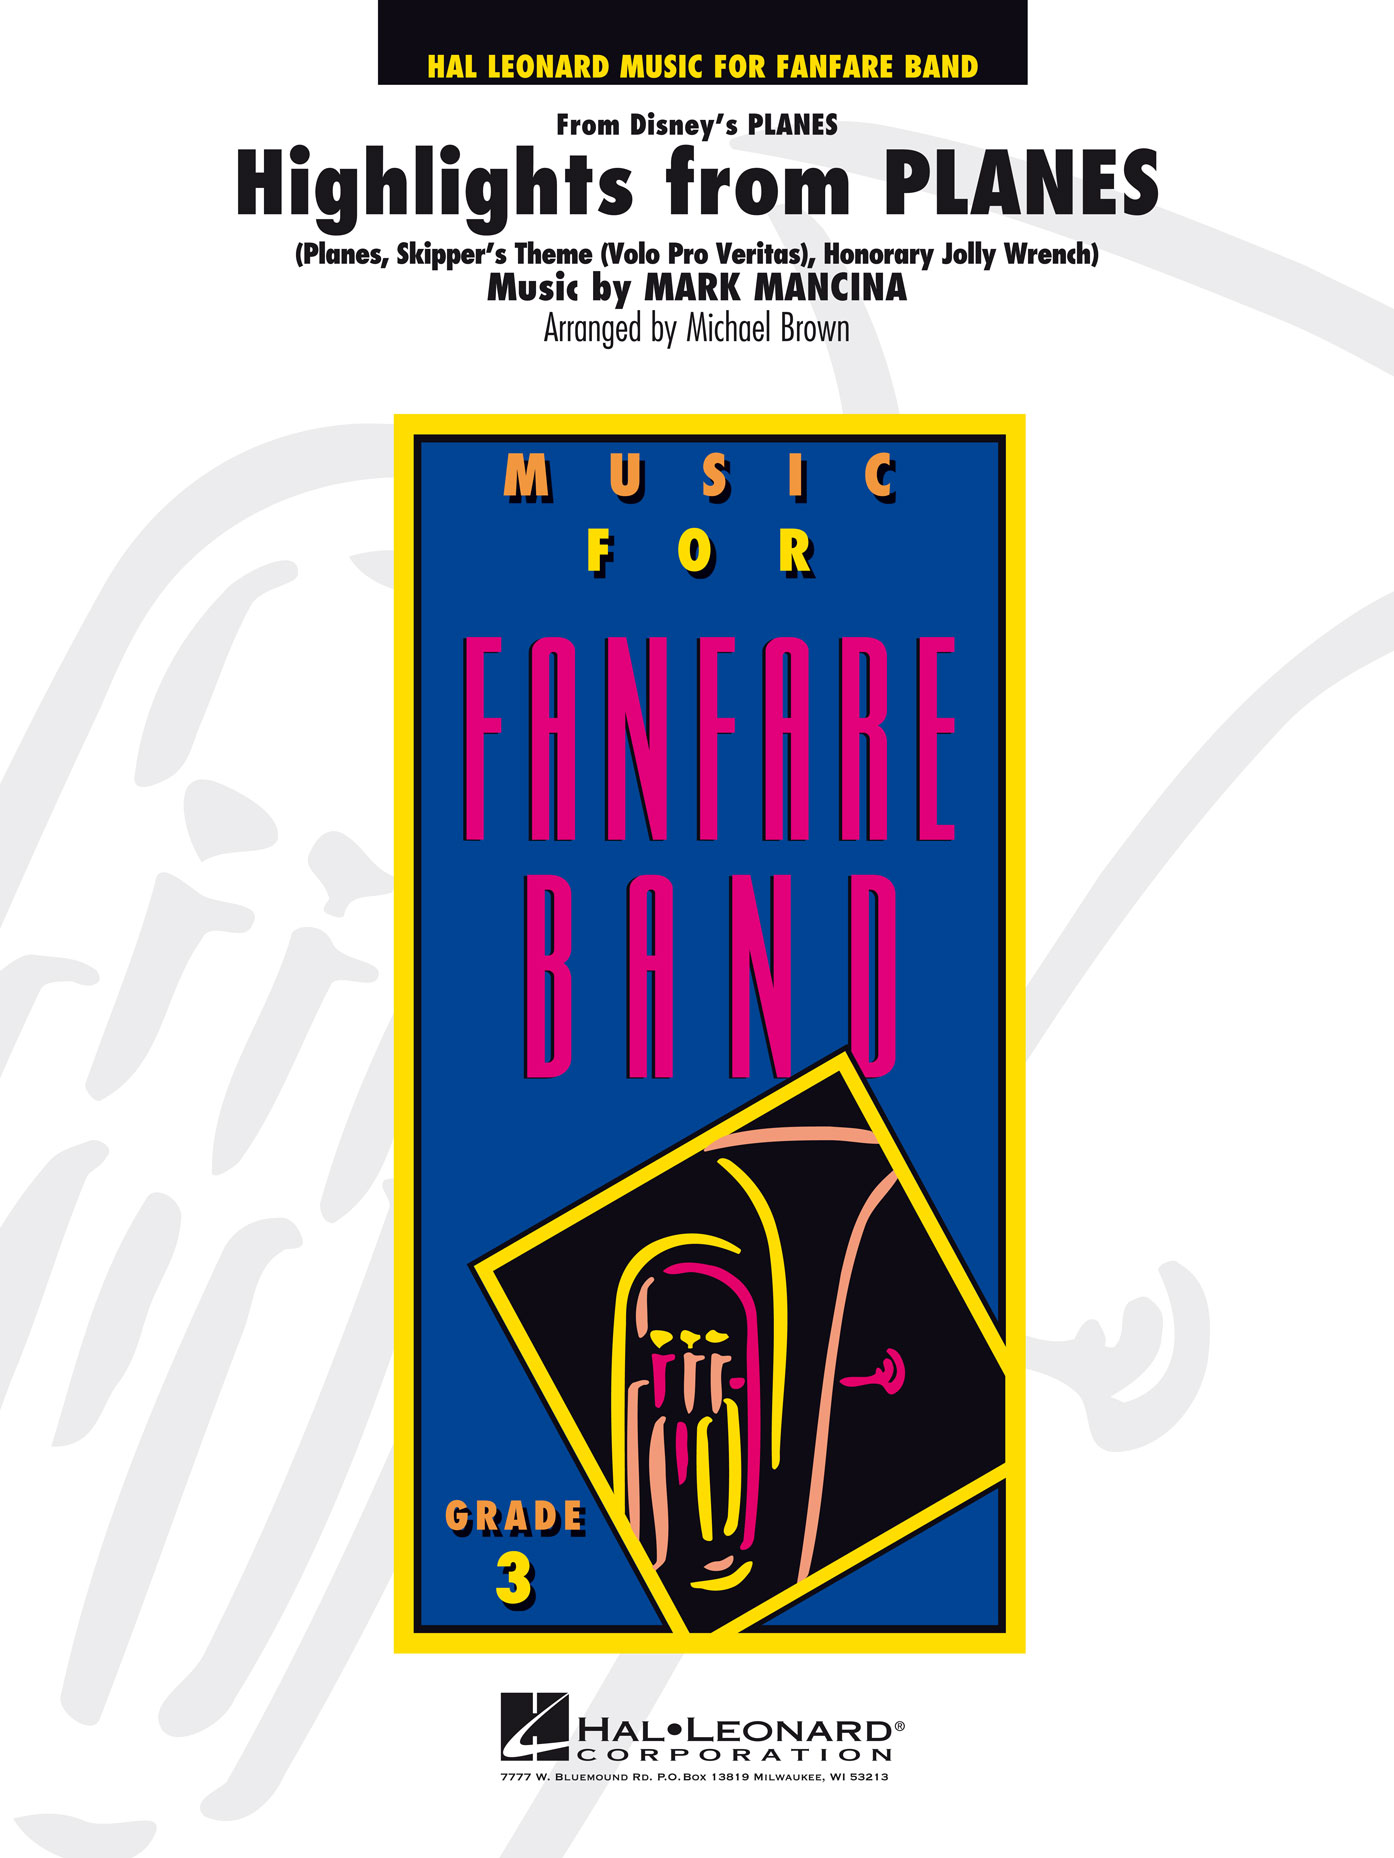 Mark Mancina: Highlights from Planes: Fanfare Band: Score & Parts